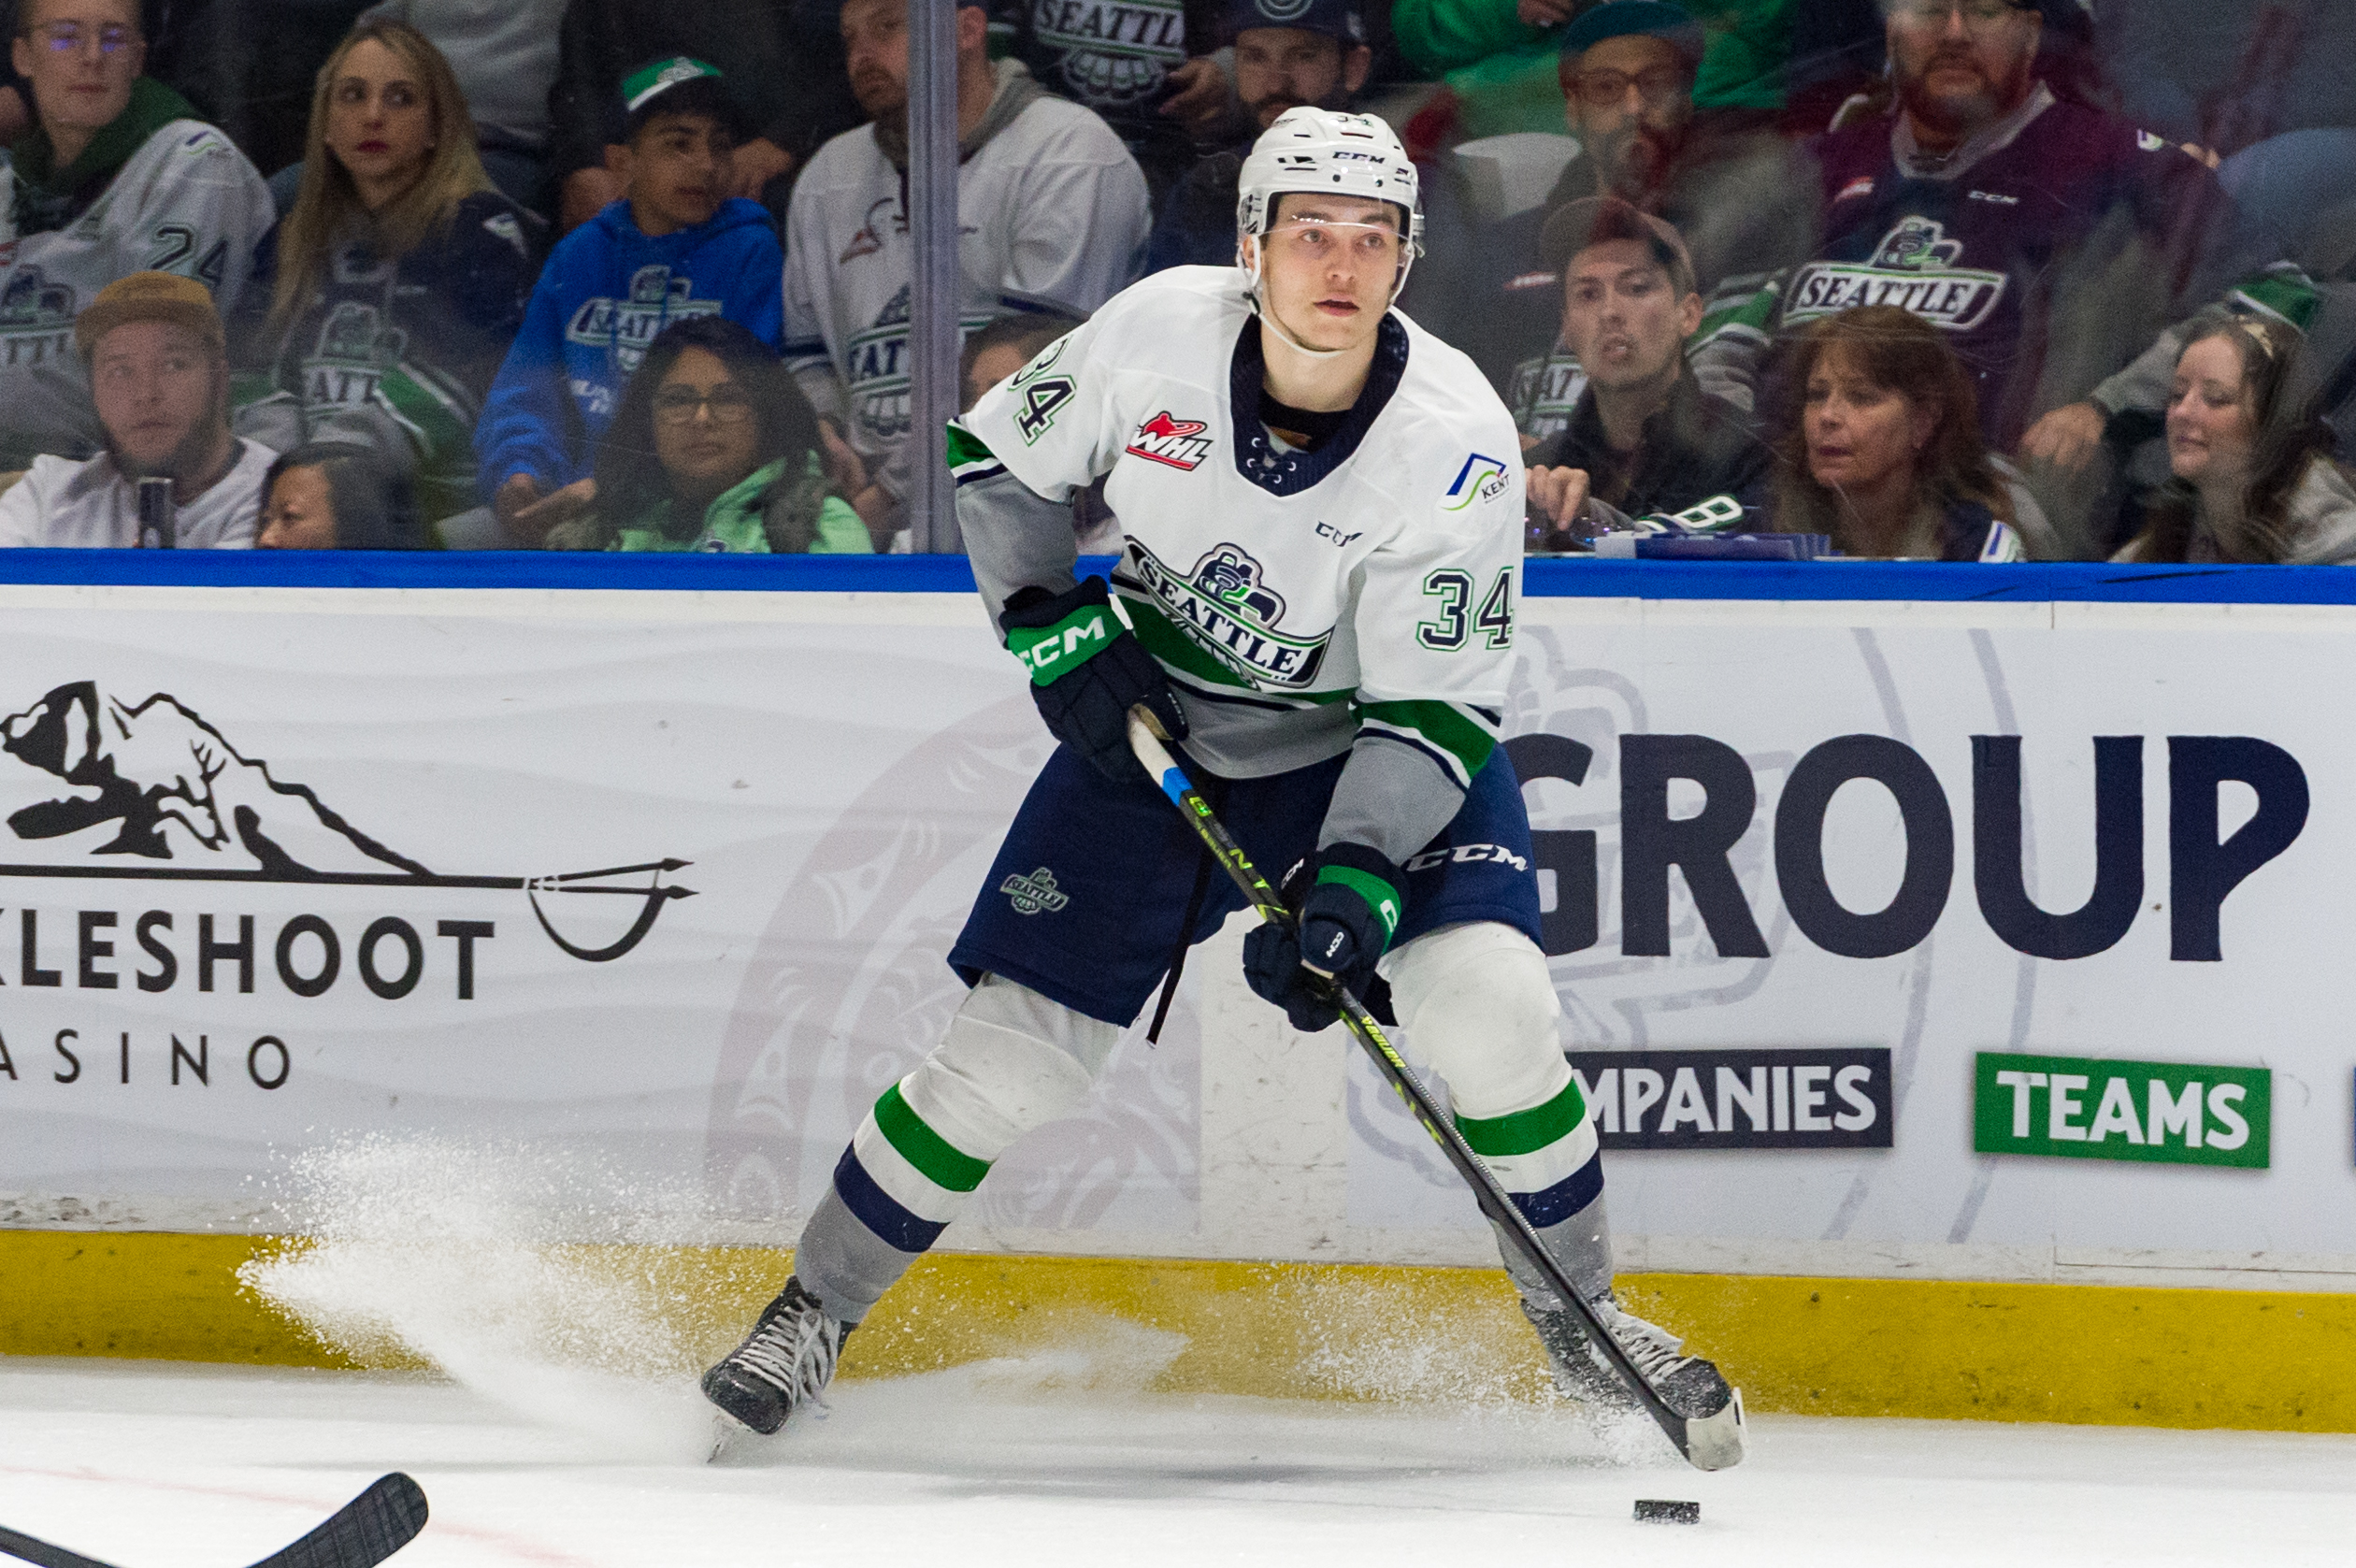 Seattle Thunderbirds on Twitter: Making his return to the lineup